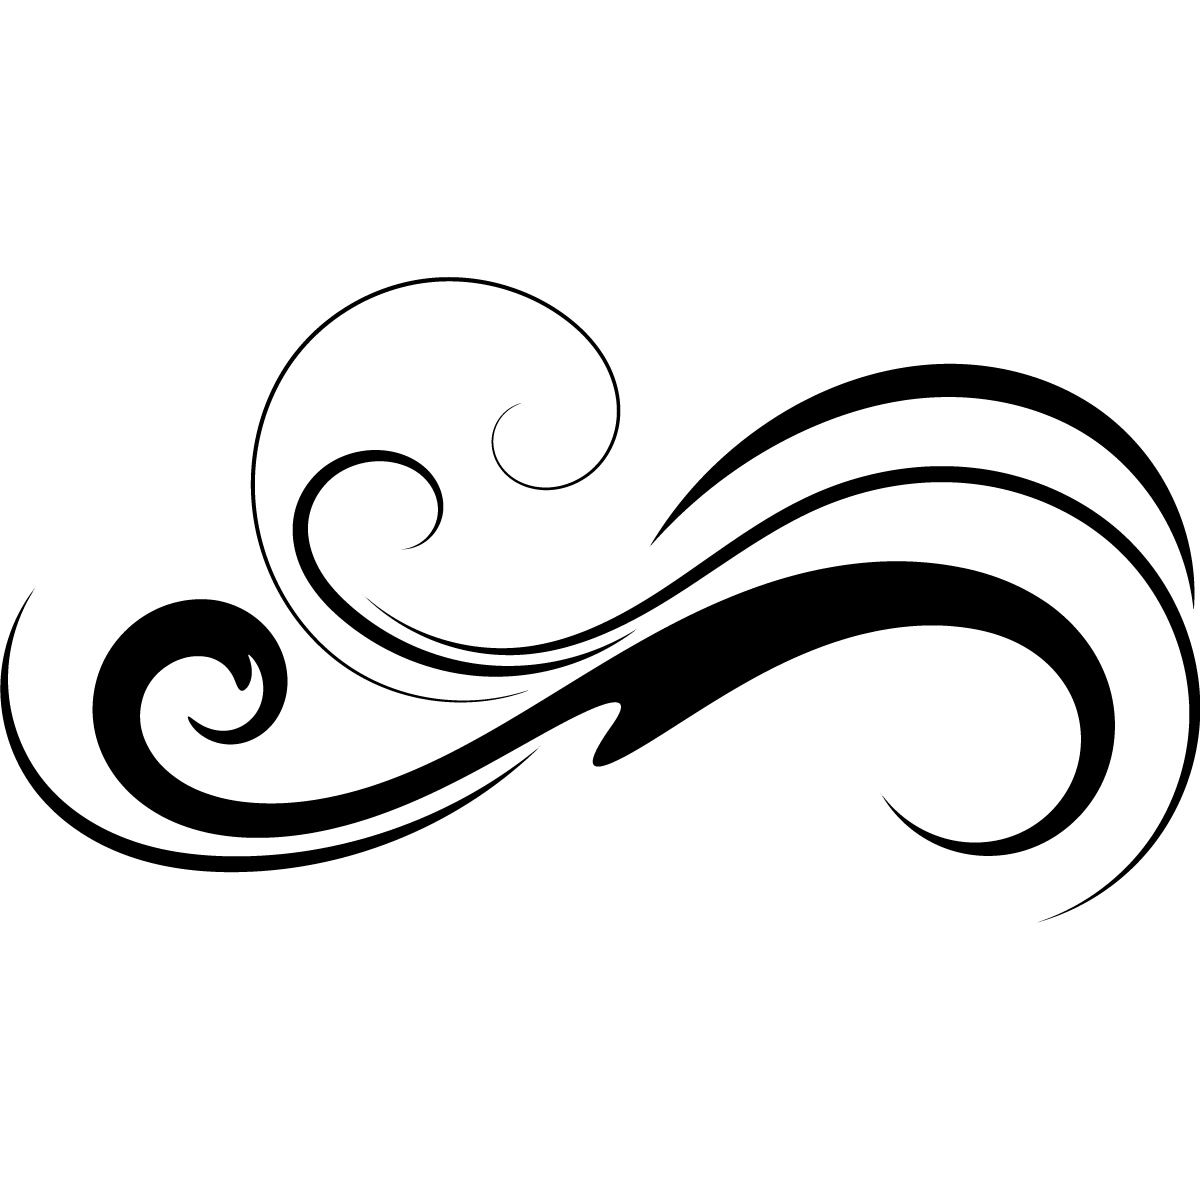 Line Drawing Of A Wave Free Cliparts That You Can Download